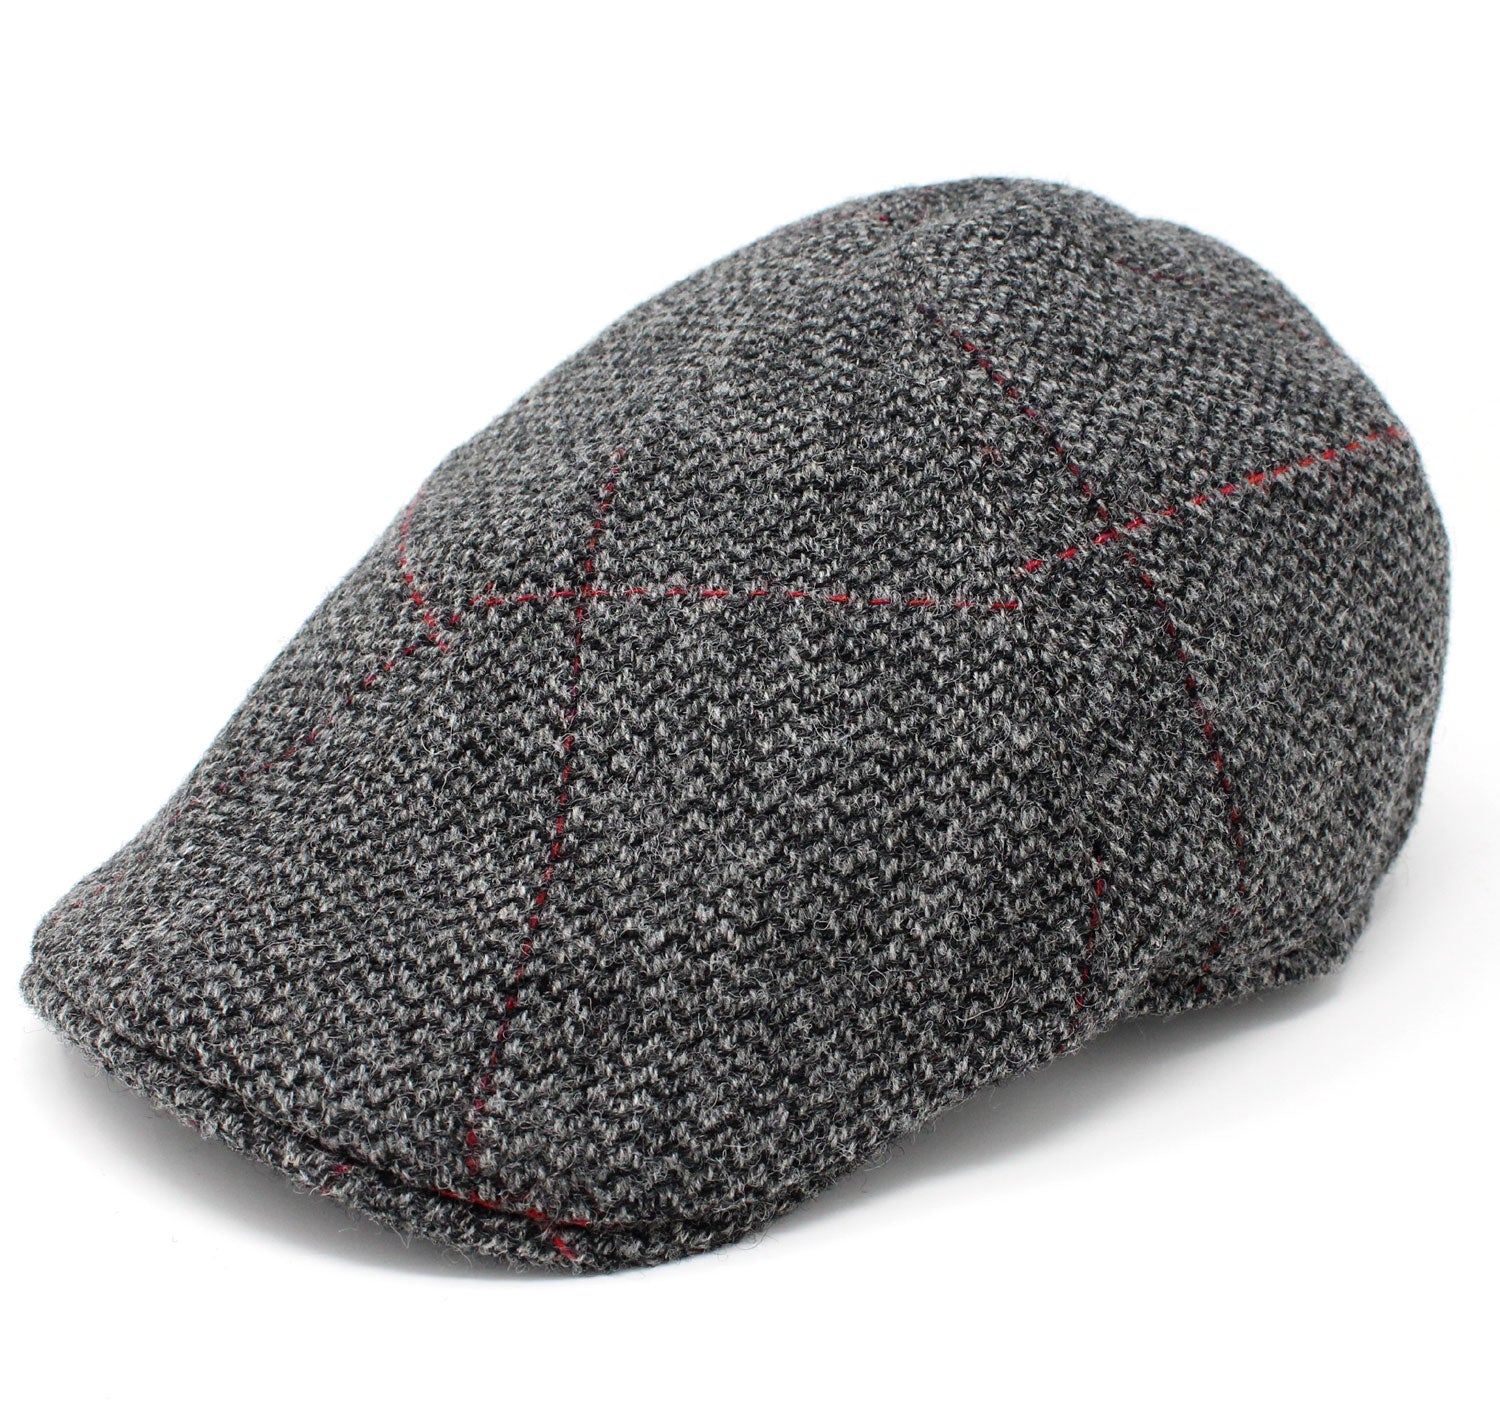 Hanna Duckbill Tweed Flat Cap | Black and Grey Herringbone with Red Overcheck - Hollands Country Clothing